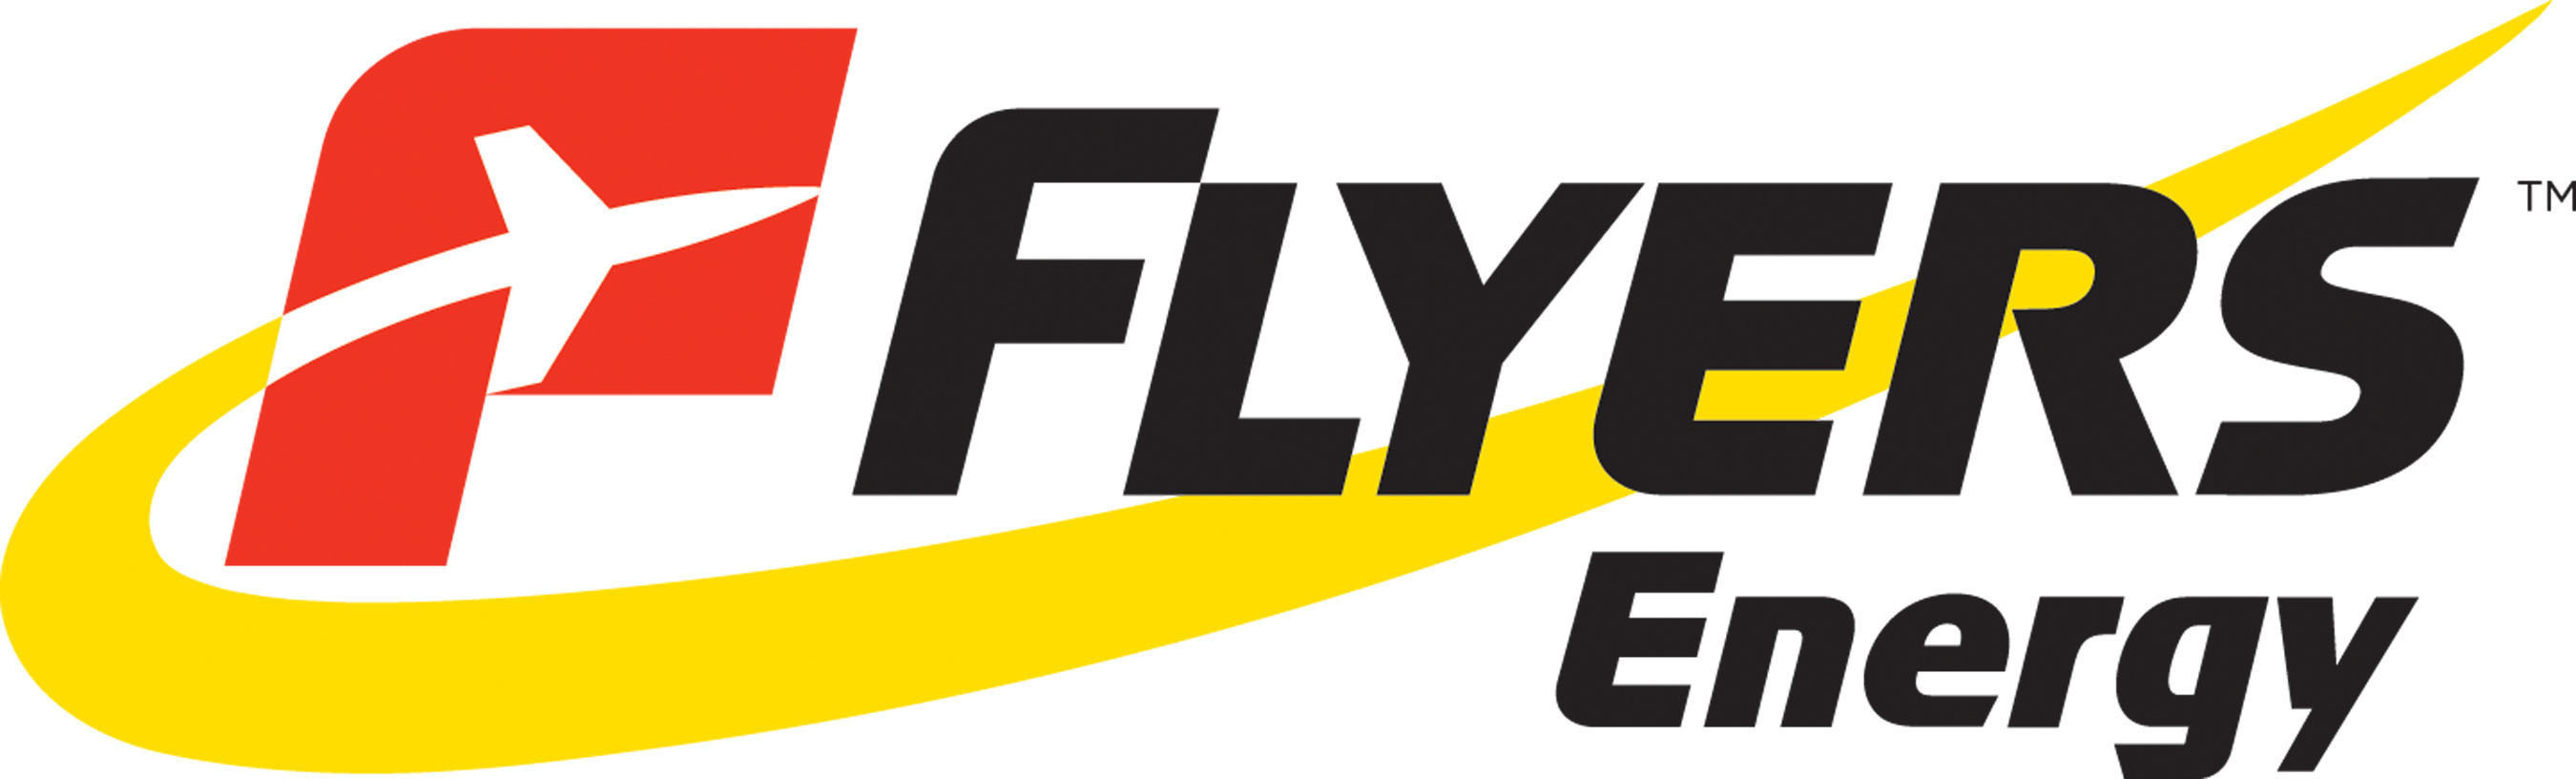 Flyers Energy offers commercial fueling at 230,000 locations nationwide as well as franchising the Flyers fuel brand and distributing wholesale and branded retail fuel, commercial lubricants, renewable fuels and solar power in the United States. (PRNewsFoto/Flyers Energy, LLC) (PRNewsFoto/)